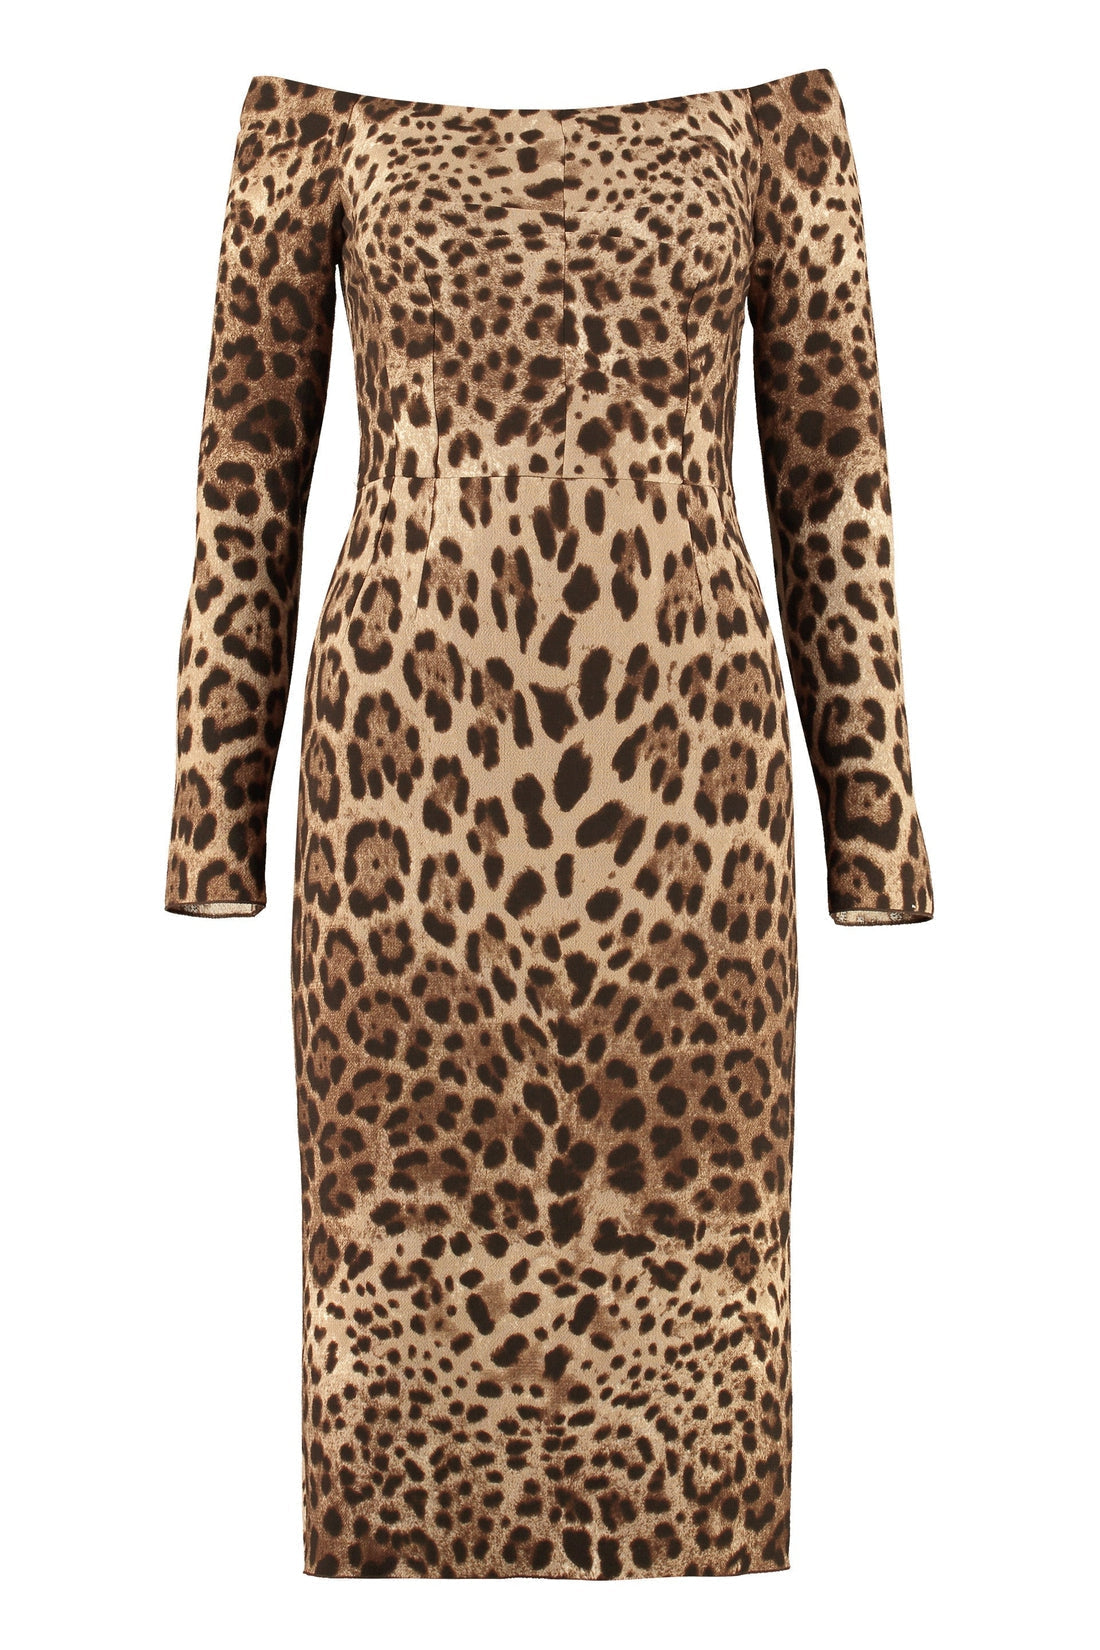 Dolce & Gabbana-OUTLET-SALE-Printed wool dress-ARCHIVIST